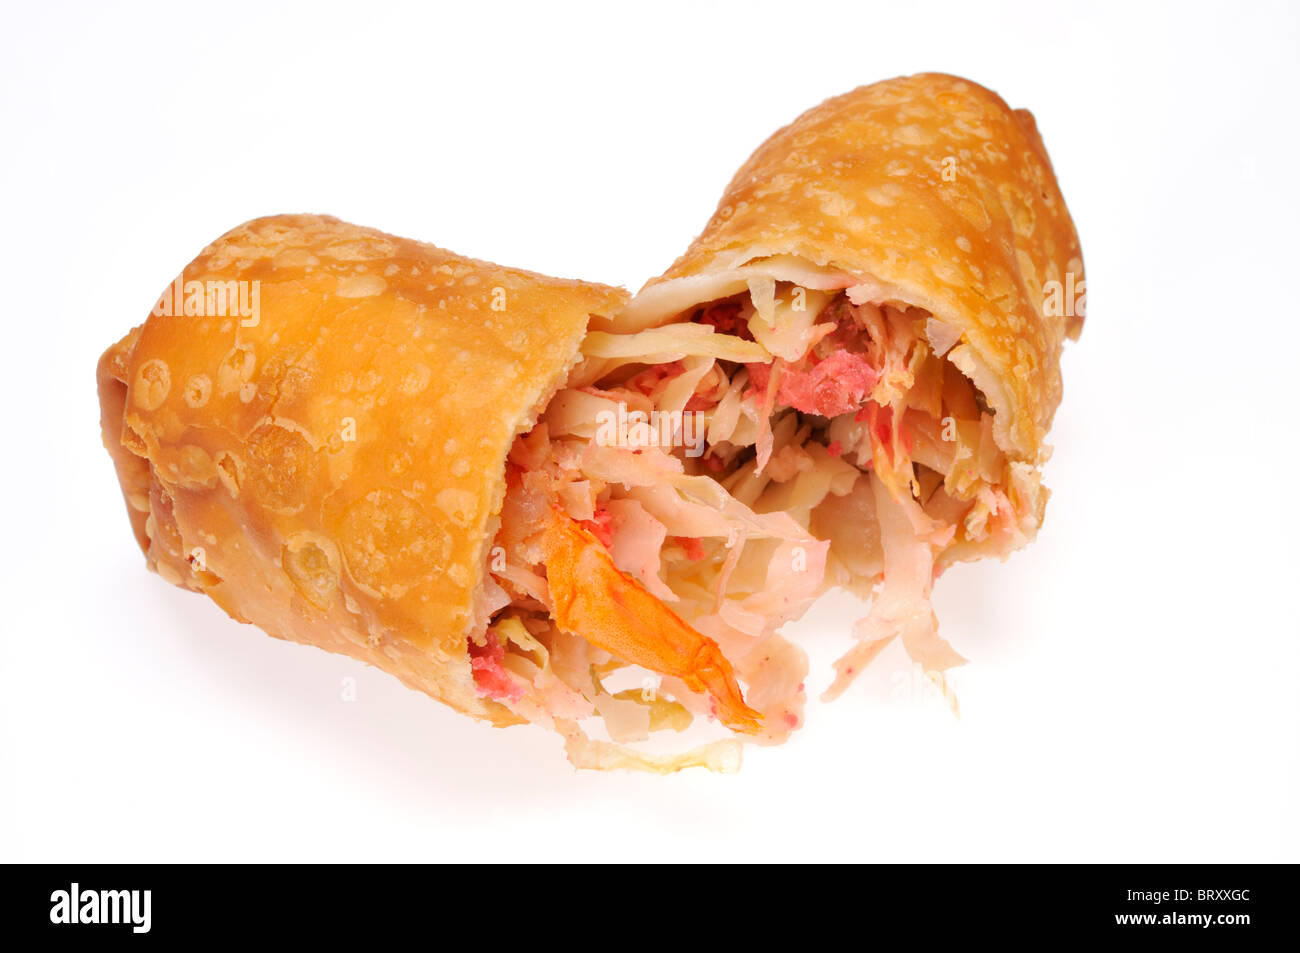 An egg roll cut in half showing its ingredients on white background cut out. Stock Photo